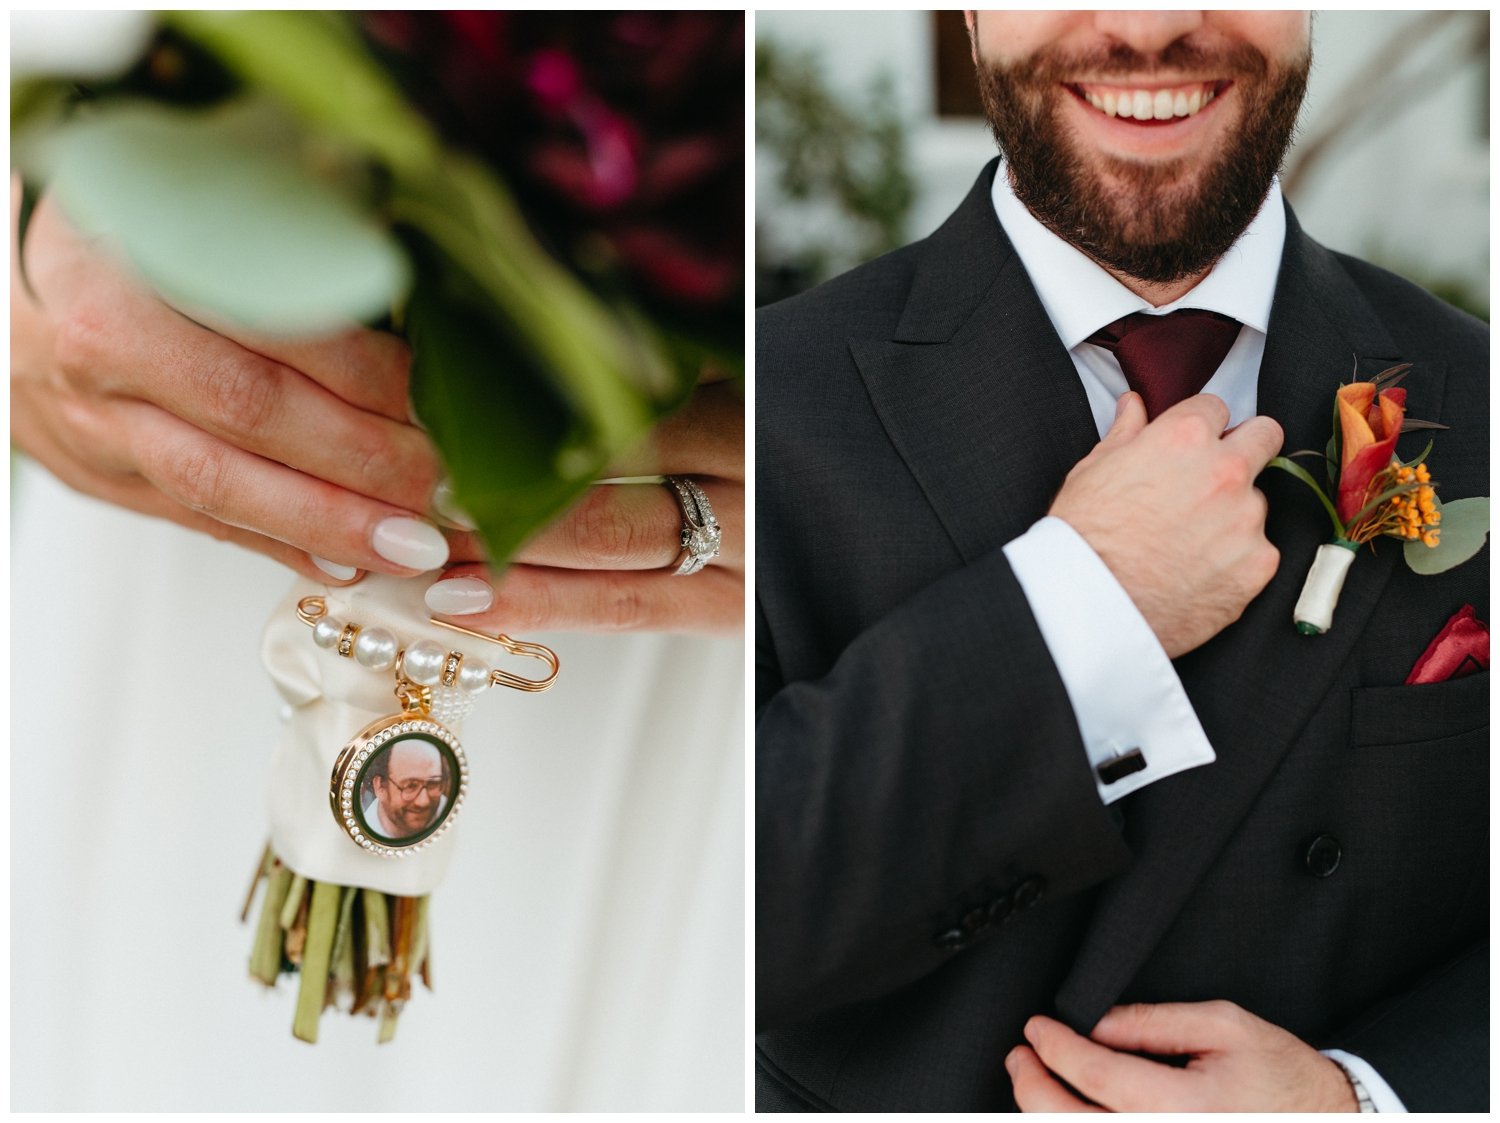 Close up photographs of bride and groom's details for the intimate destination wedding